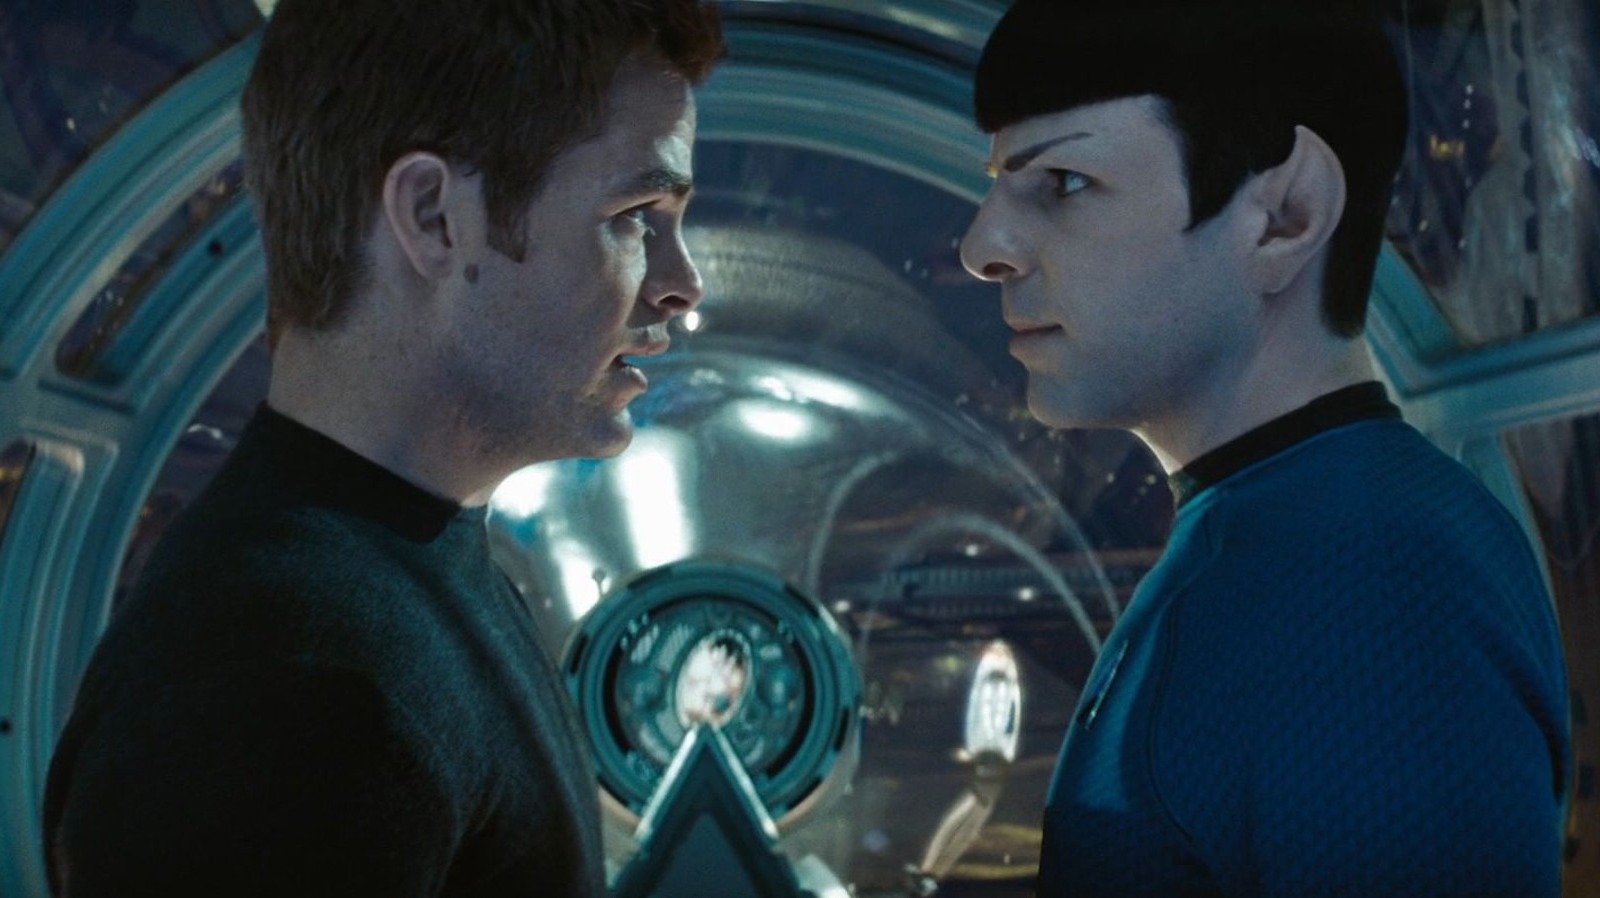 How Paramount Pictures Has Completely Bungled The Star Trek Film Franchise's Potential